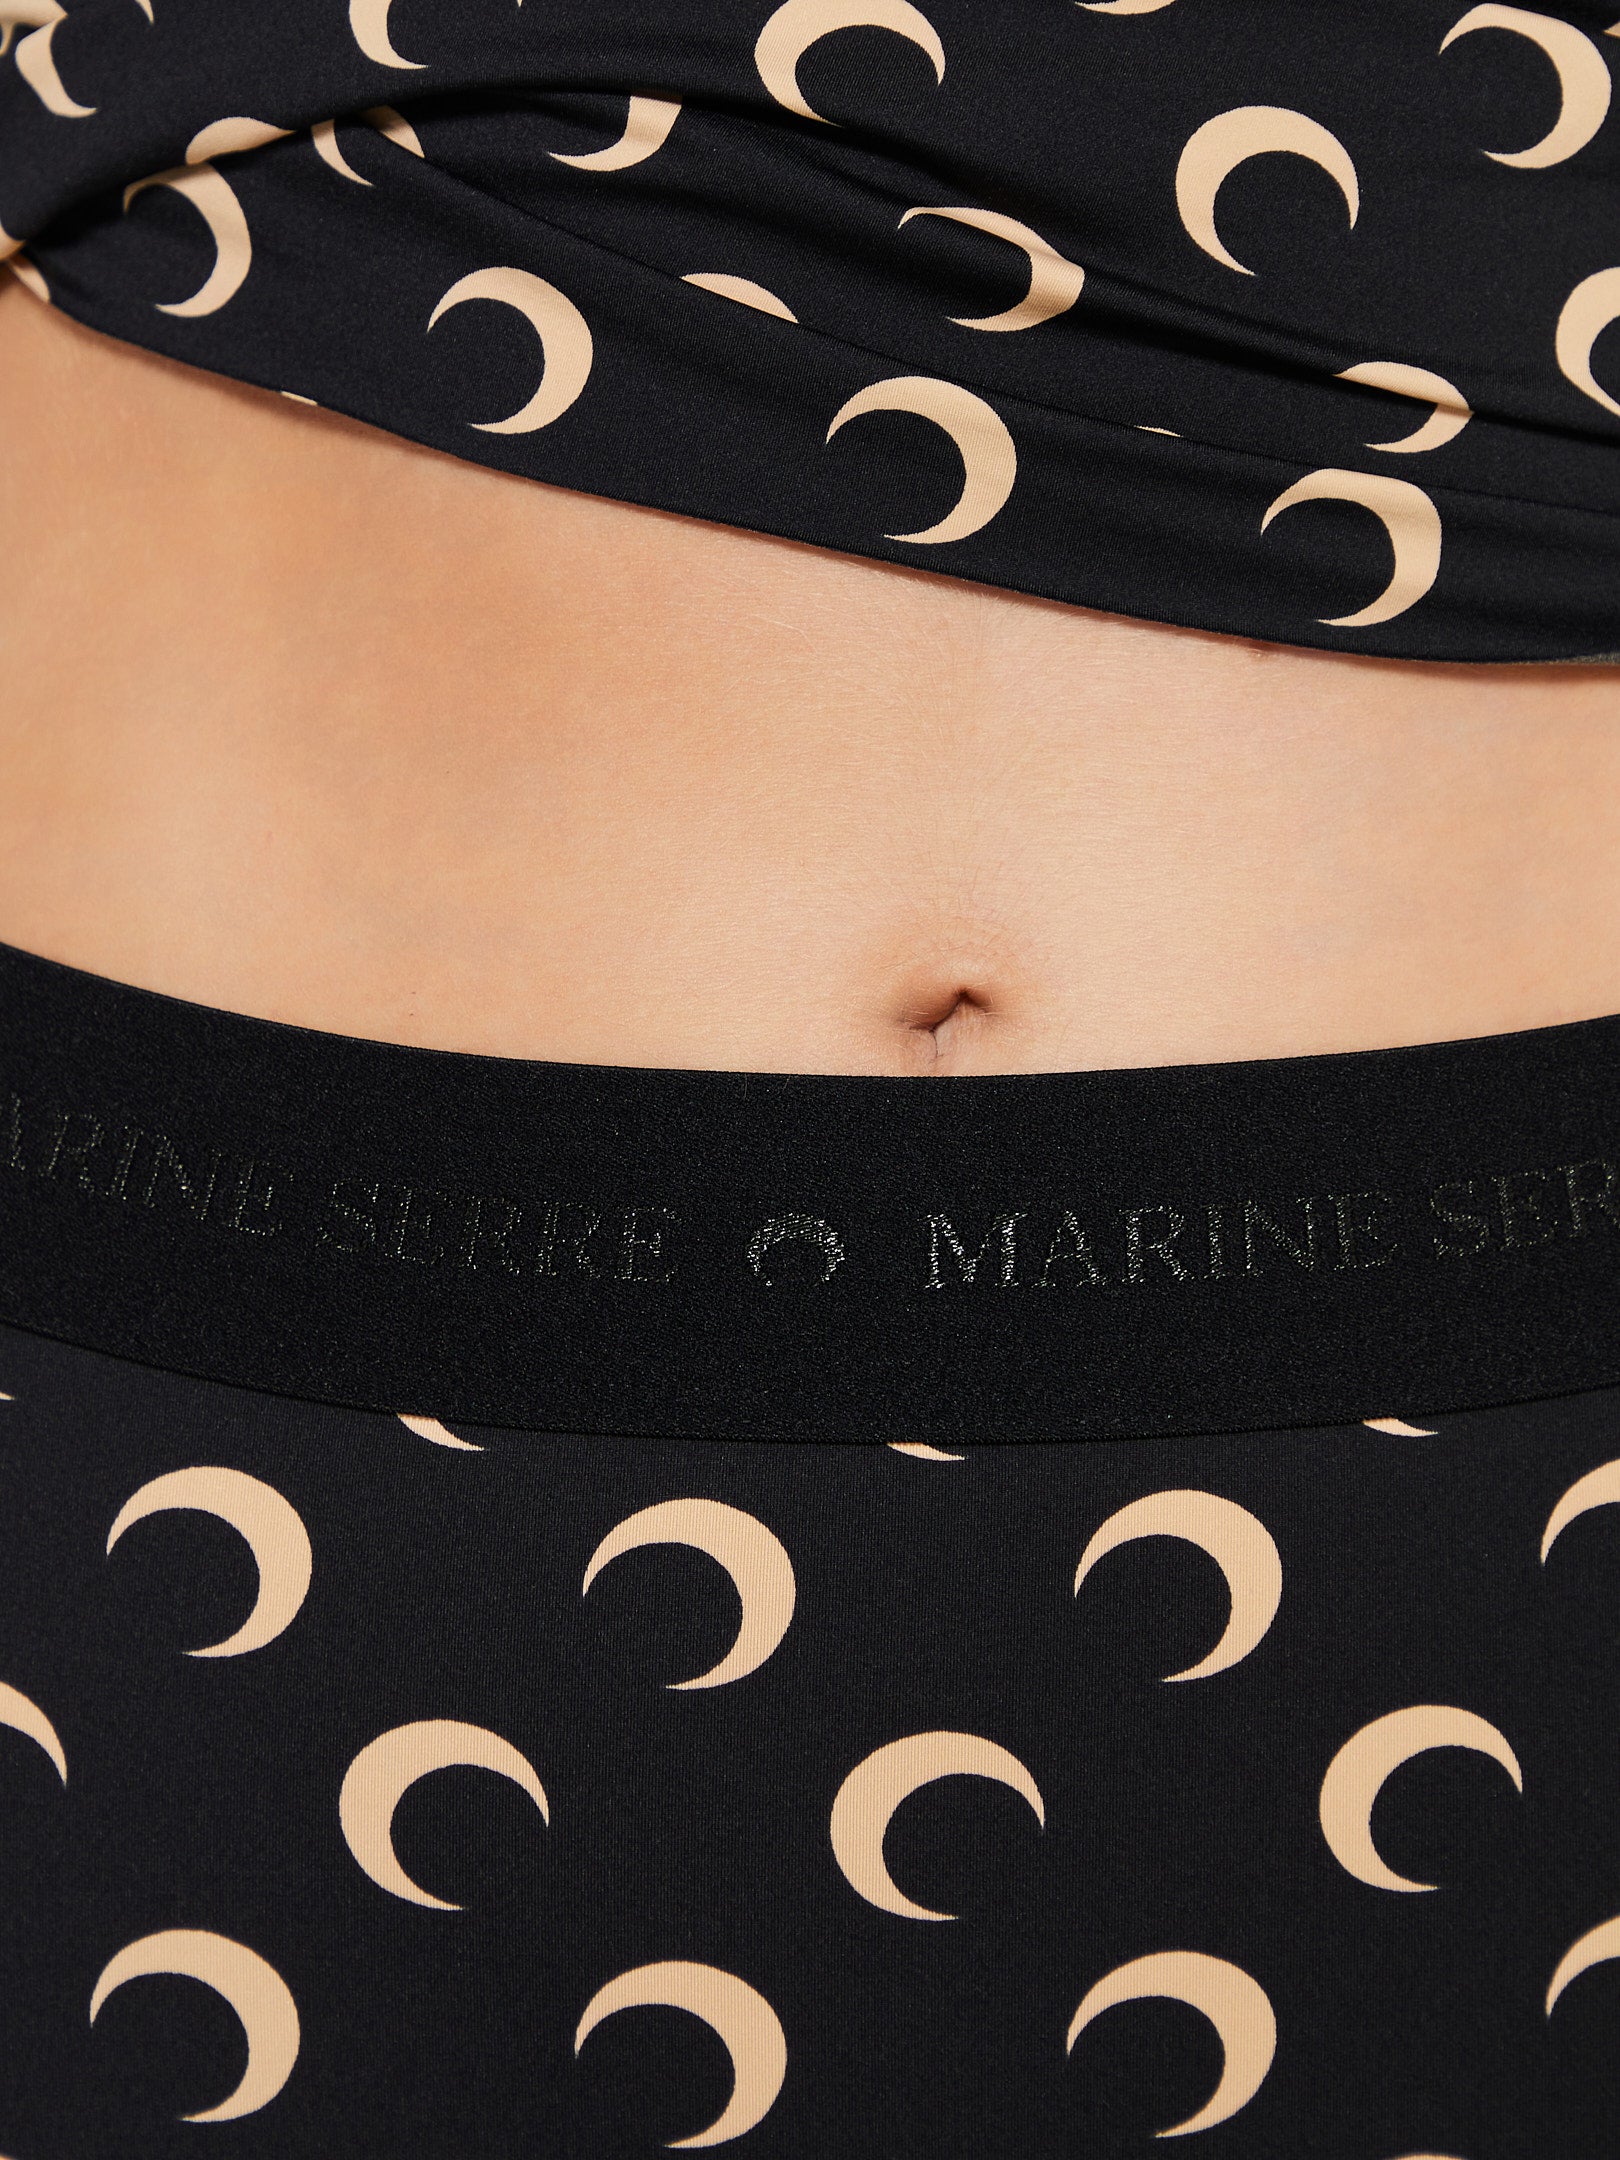 Marine Serre - Regenerated All Over Moon Jersey Leggings in Black – stoy